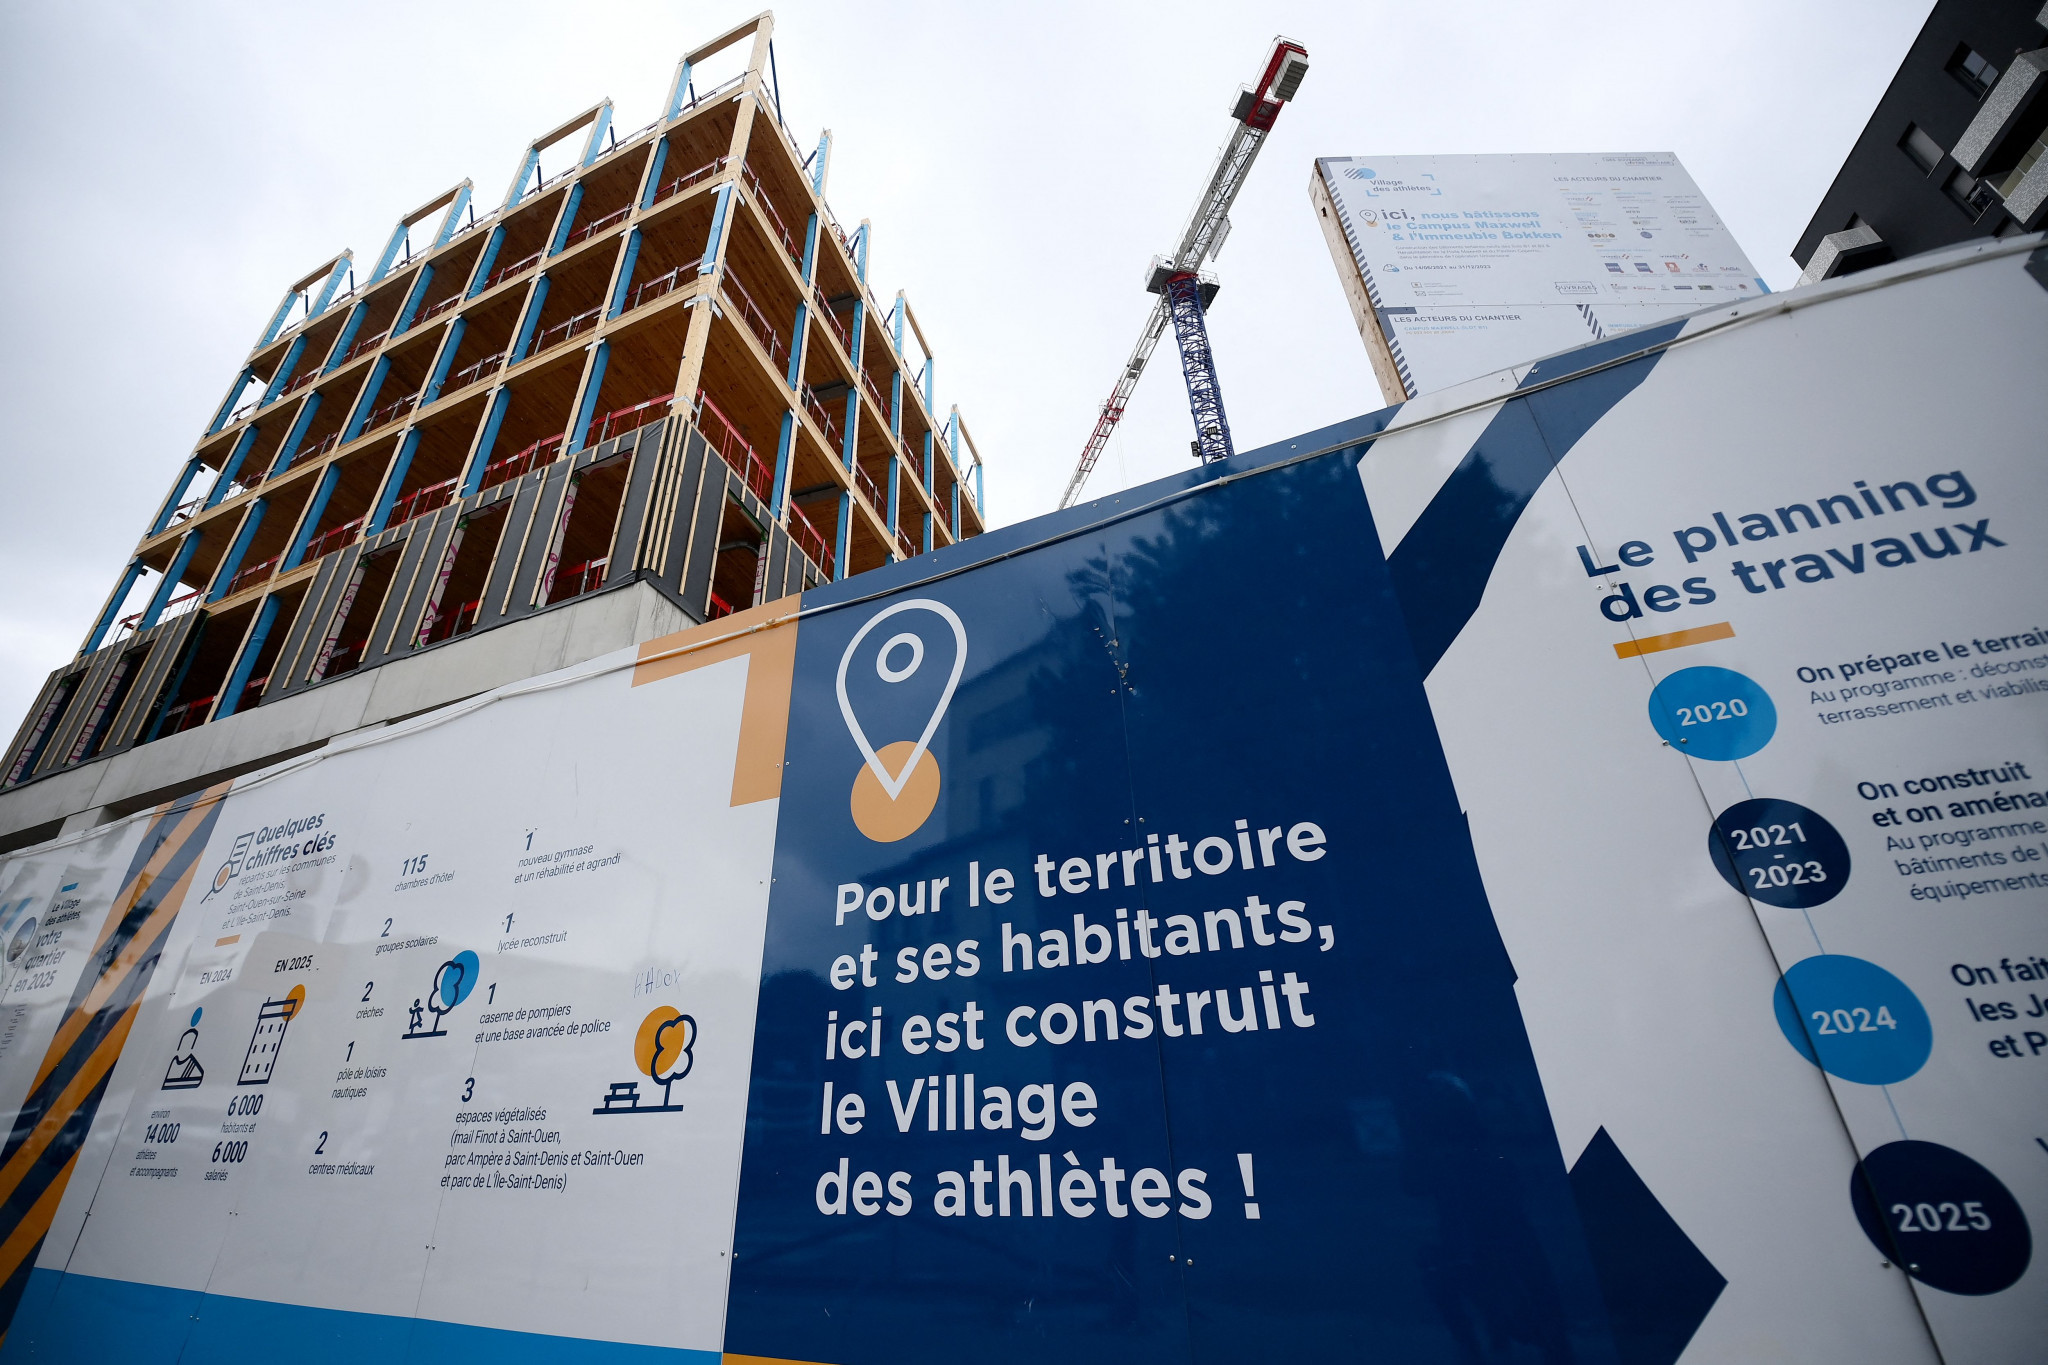 Details of 174 Paris 2024 Games Village apartments for sale provided to residents